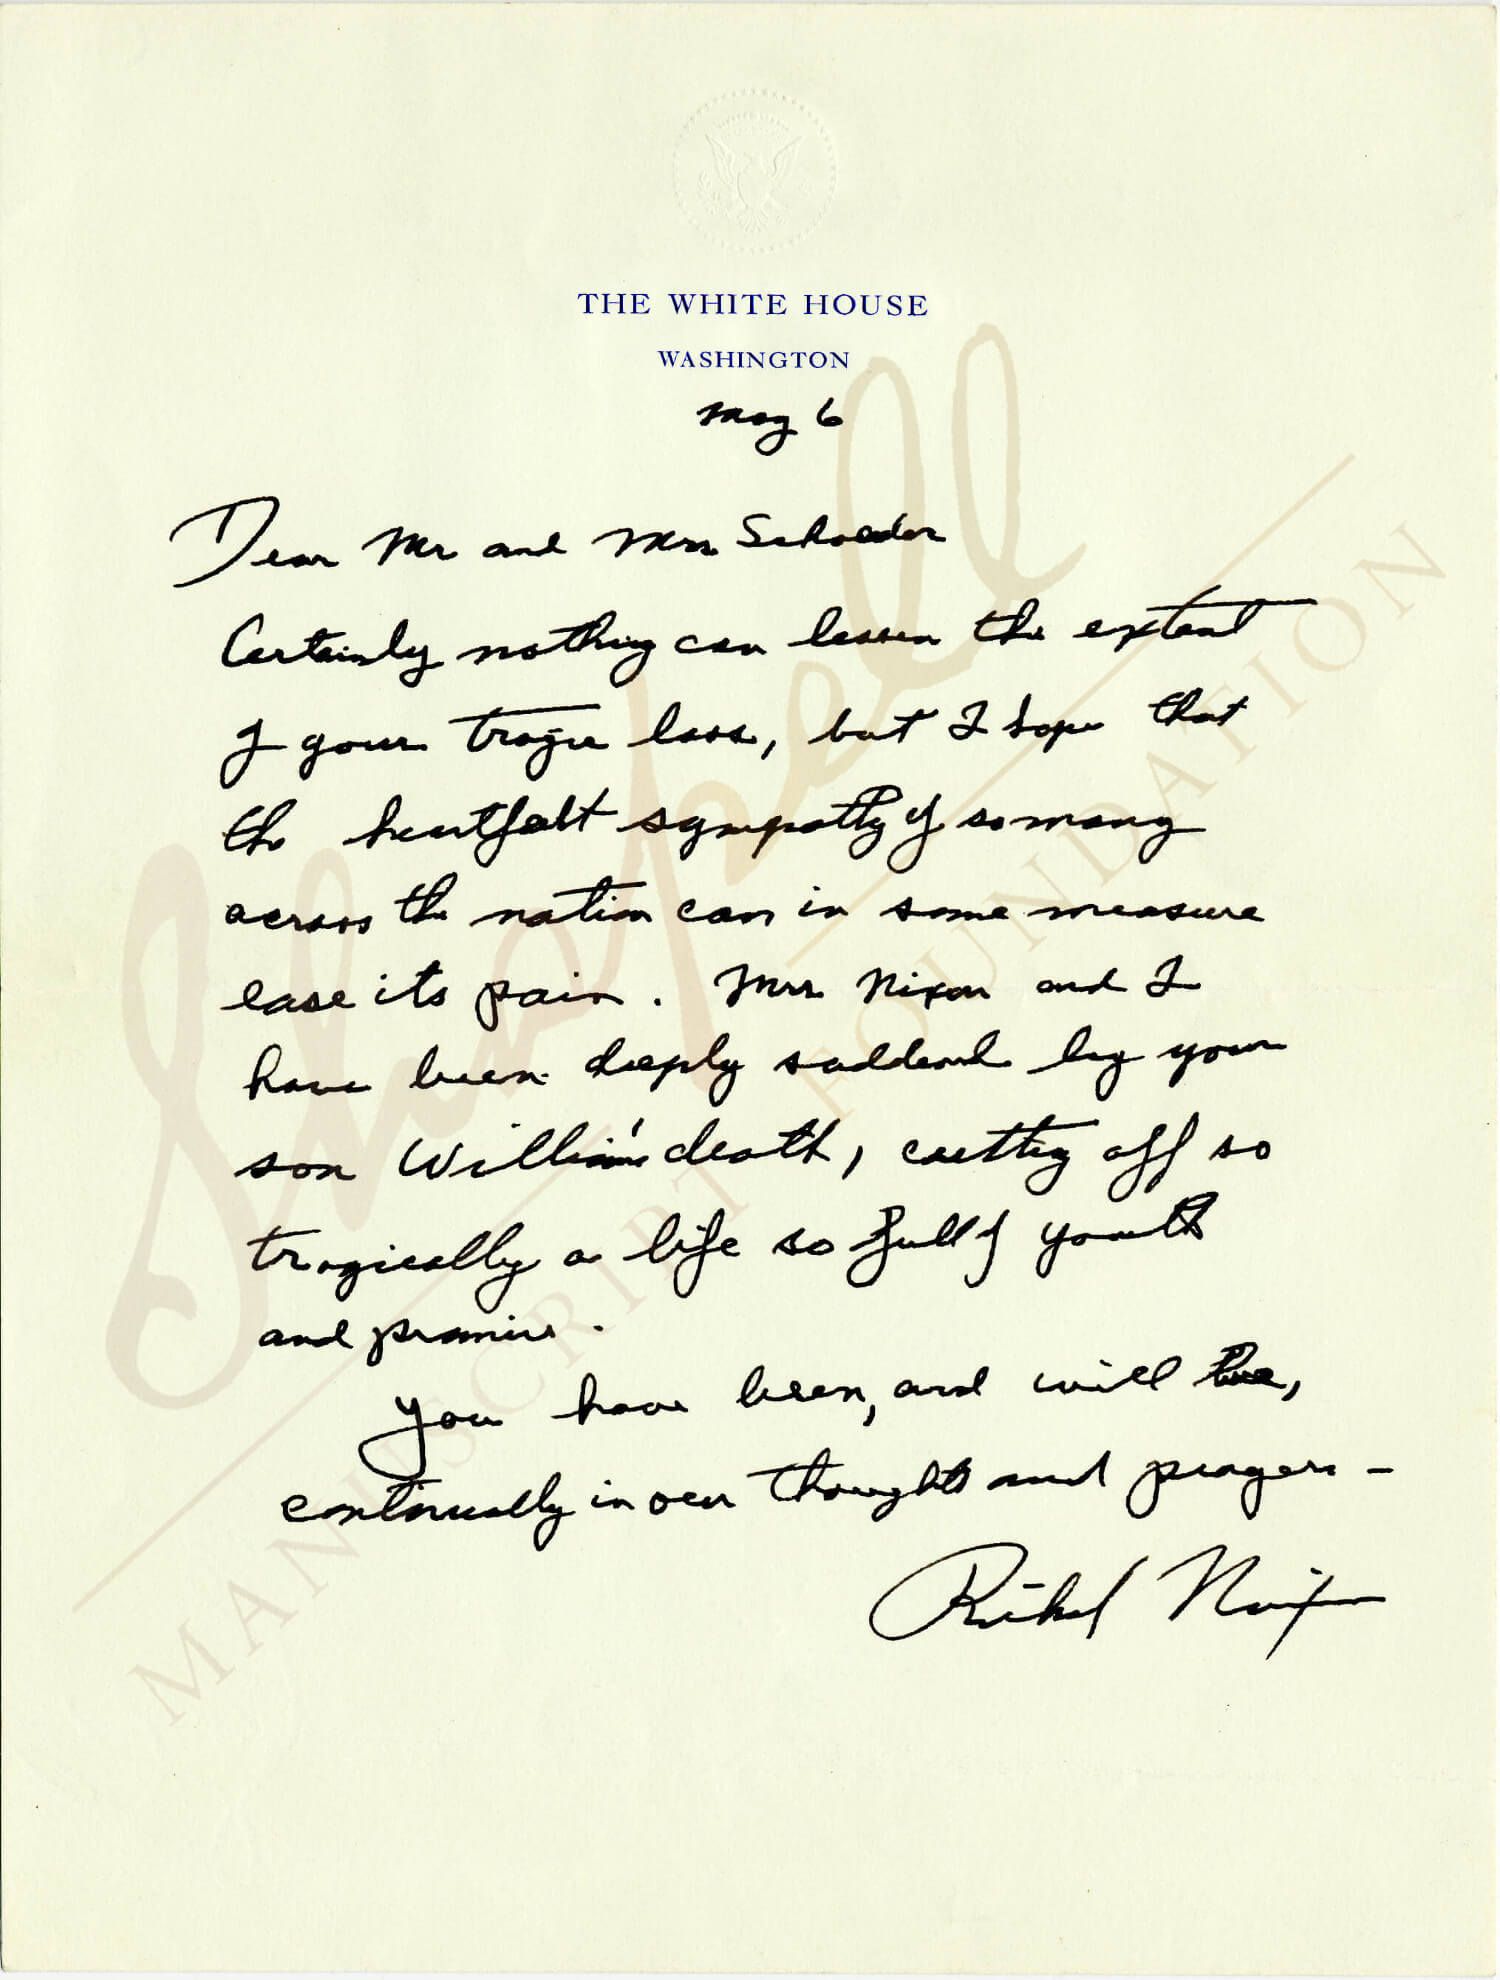 Rare Letter to Bereaved: President Nixon's Response to the Kent State Shooting